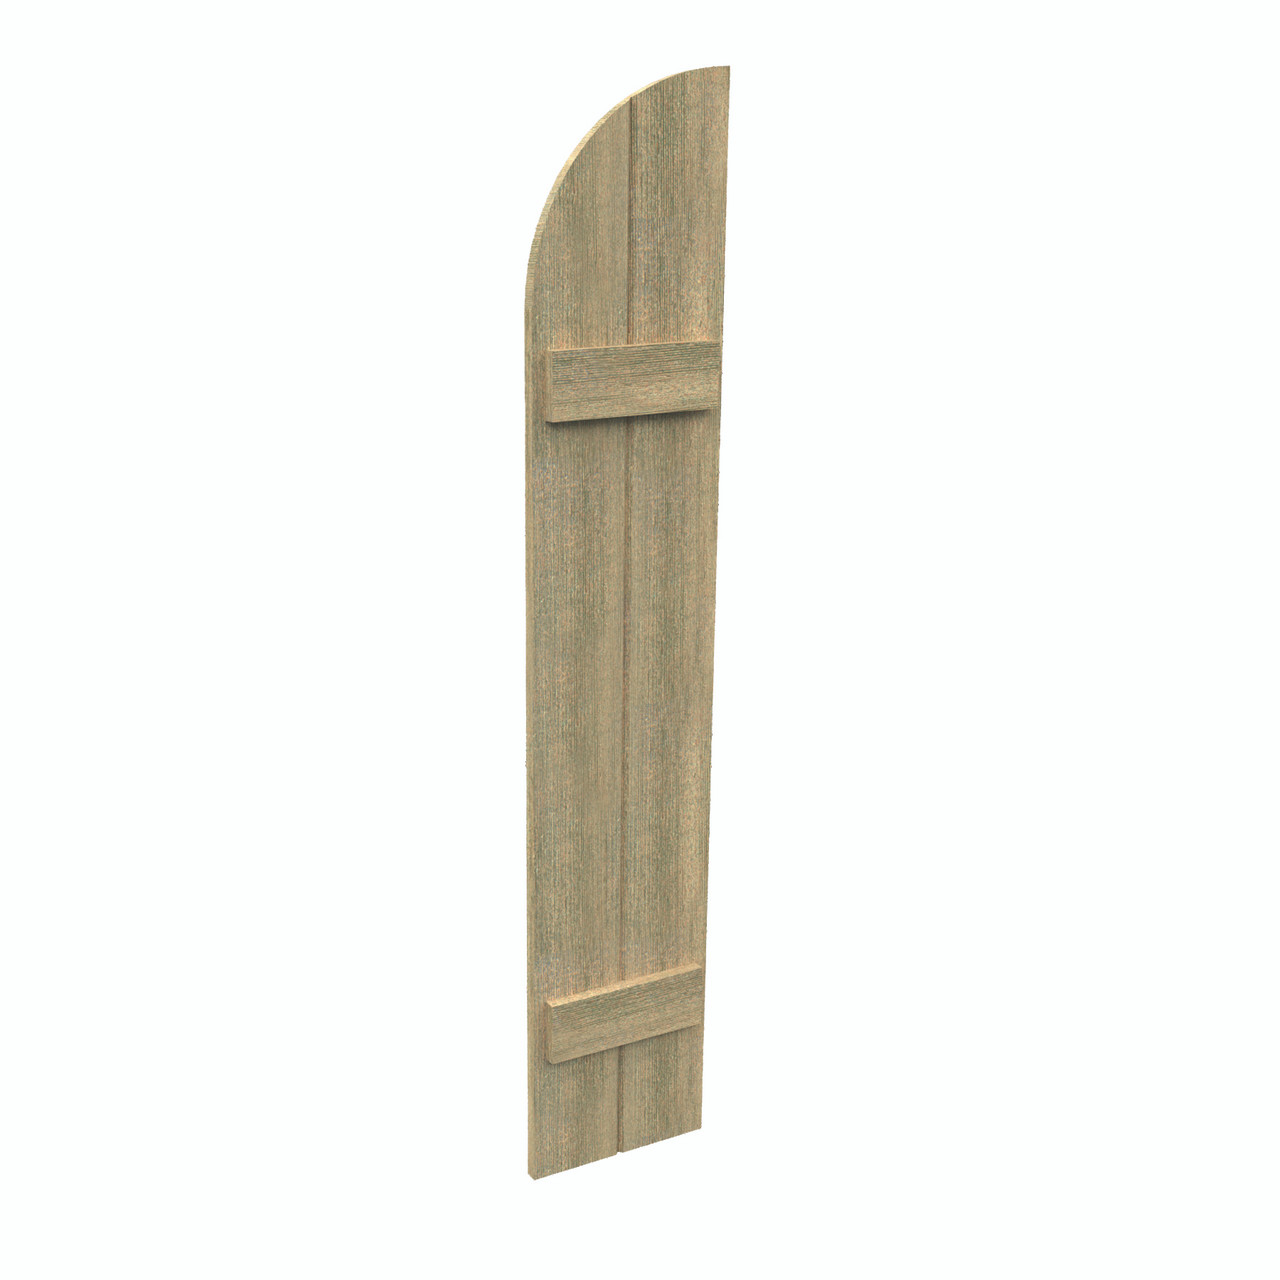 12 inch by 68 inch Quarter Round Shutter with 2-Boards